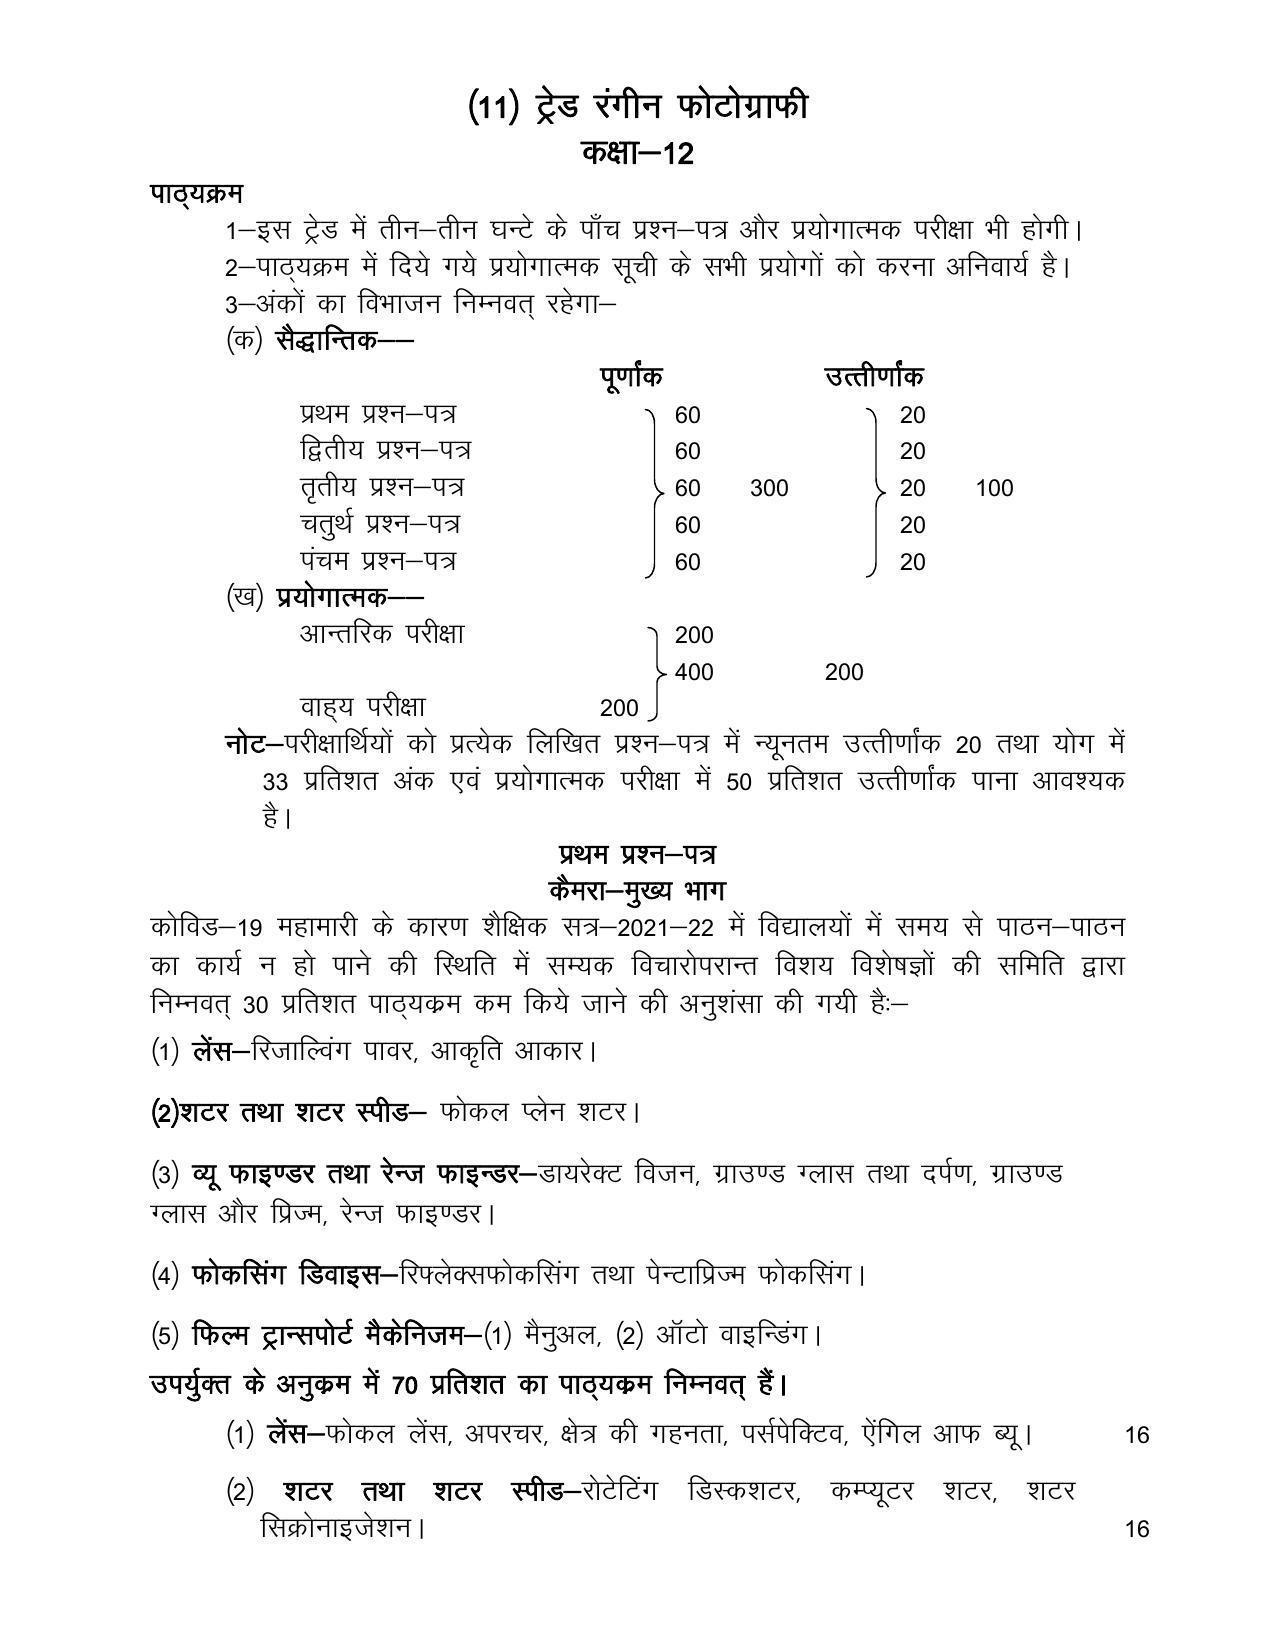 UP Board Class 12- Trade Subjects Syllabus Trade – 11 Colour Photography - Page 1